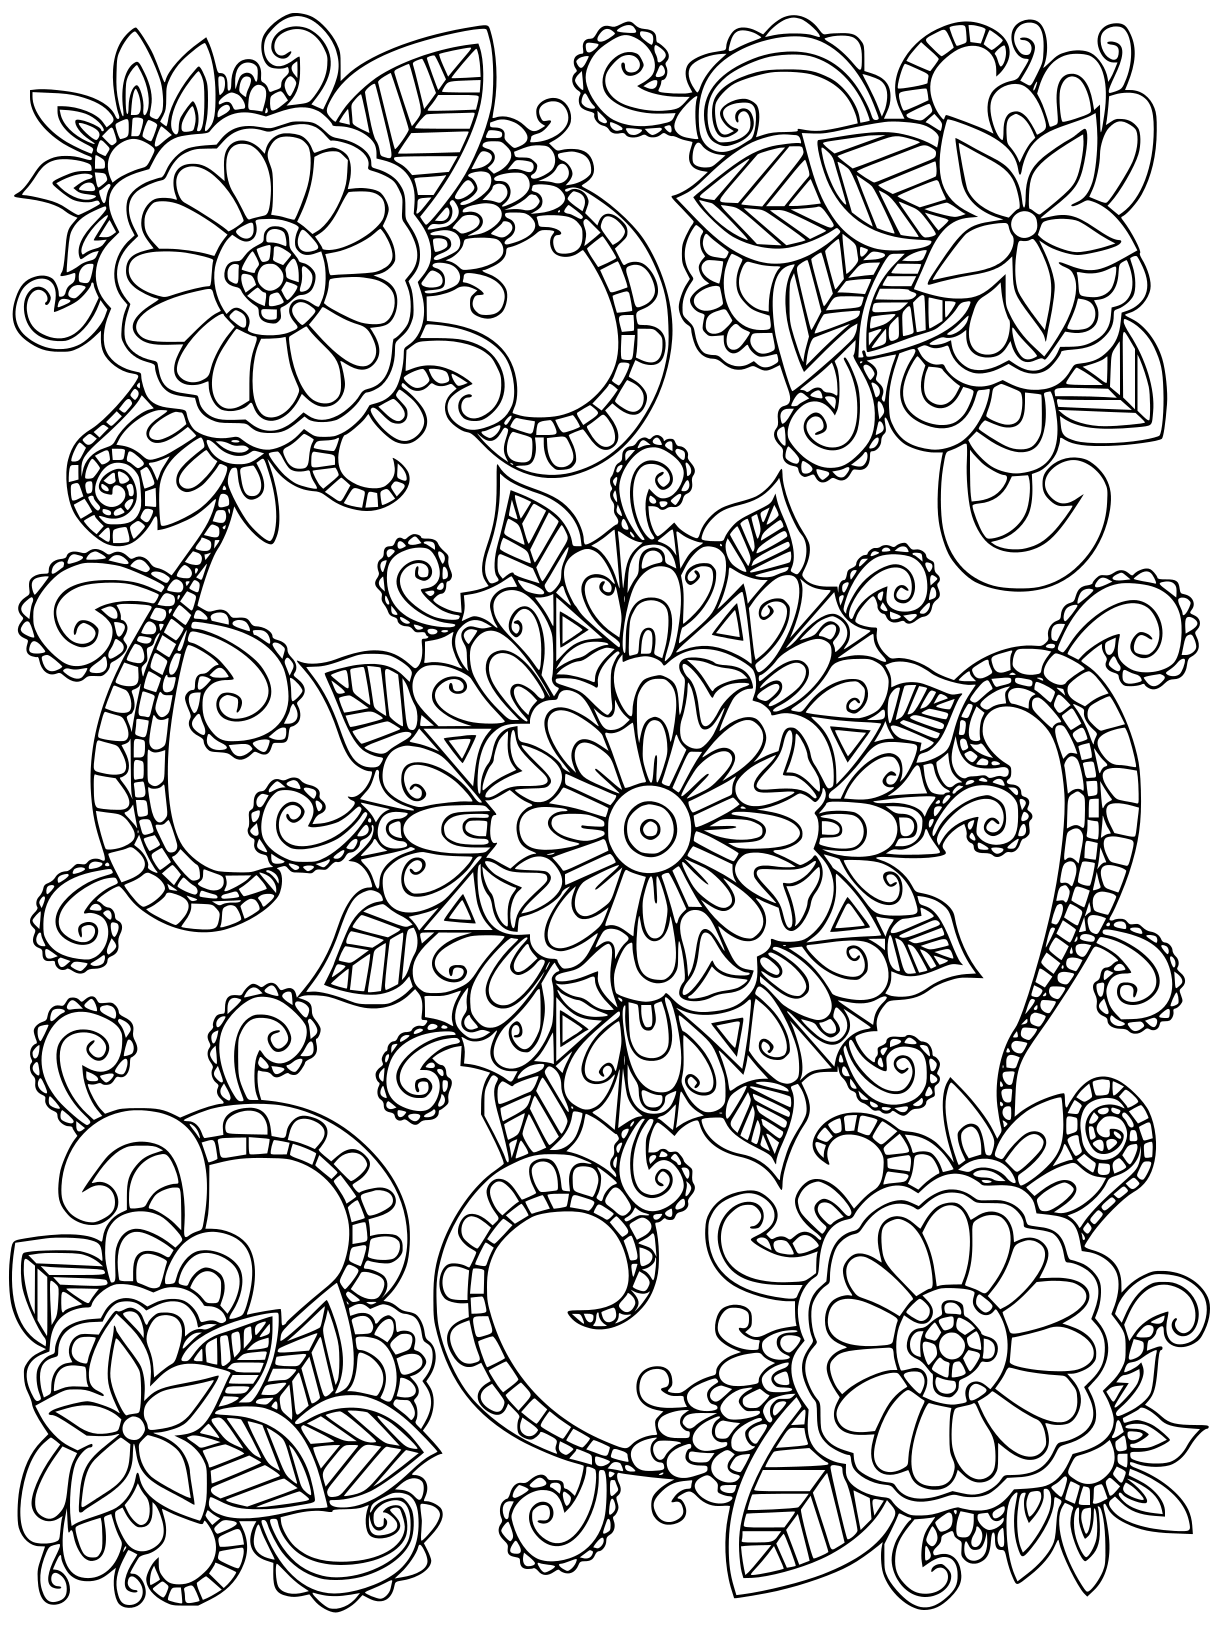 Mandala Flowers For Adults Coloring Pages - Coloring Cool